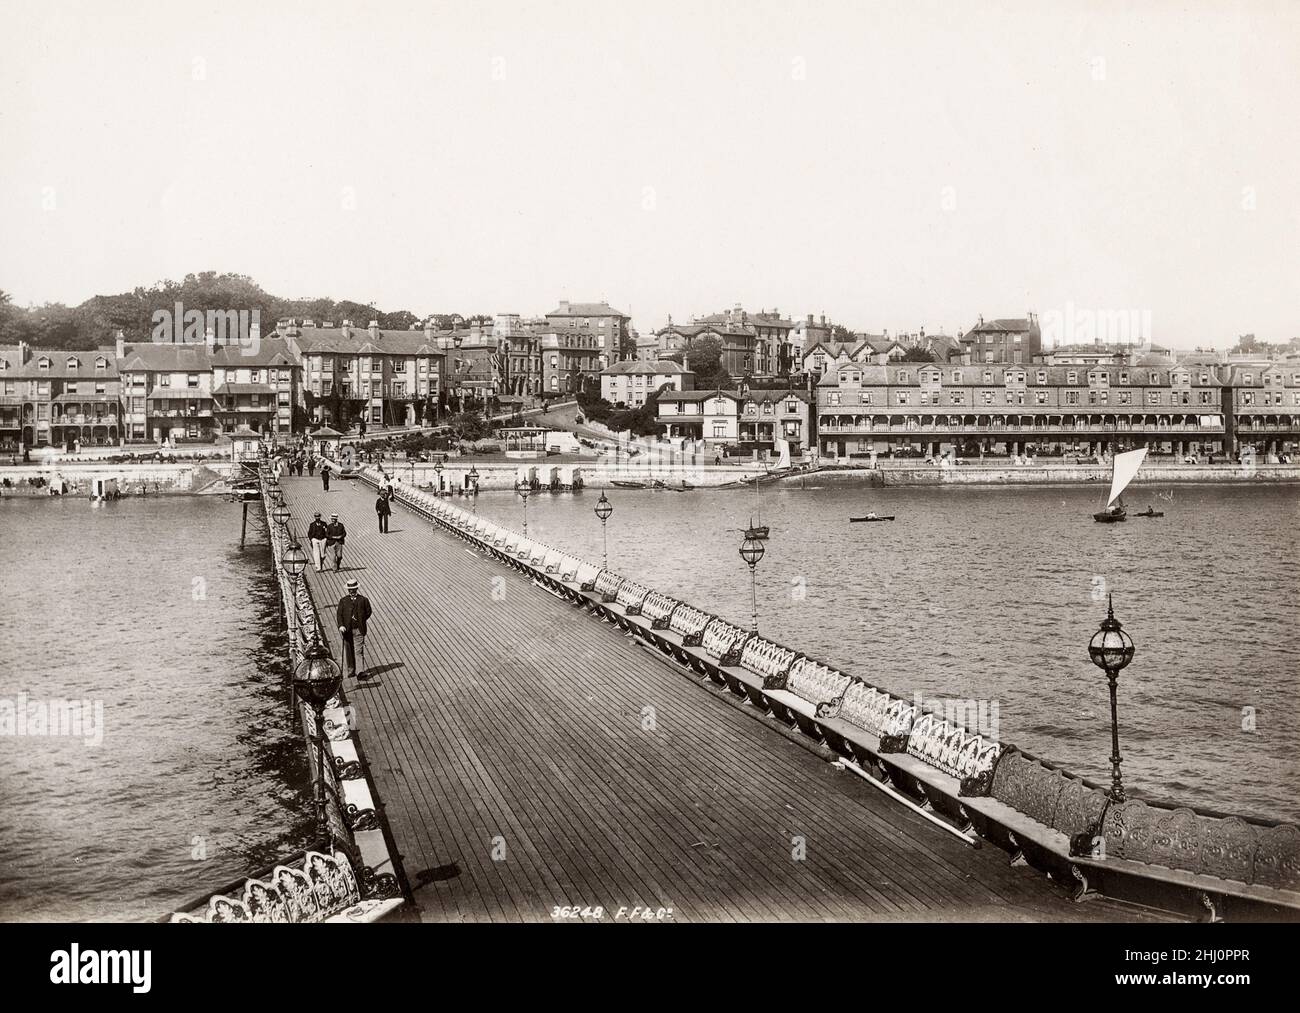 Vintage photograph, late 19th, early 20th century, view of 19895 - Sandown Pier, Isle of Wight Stock Photo